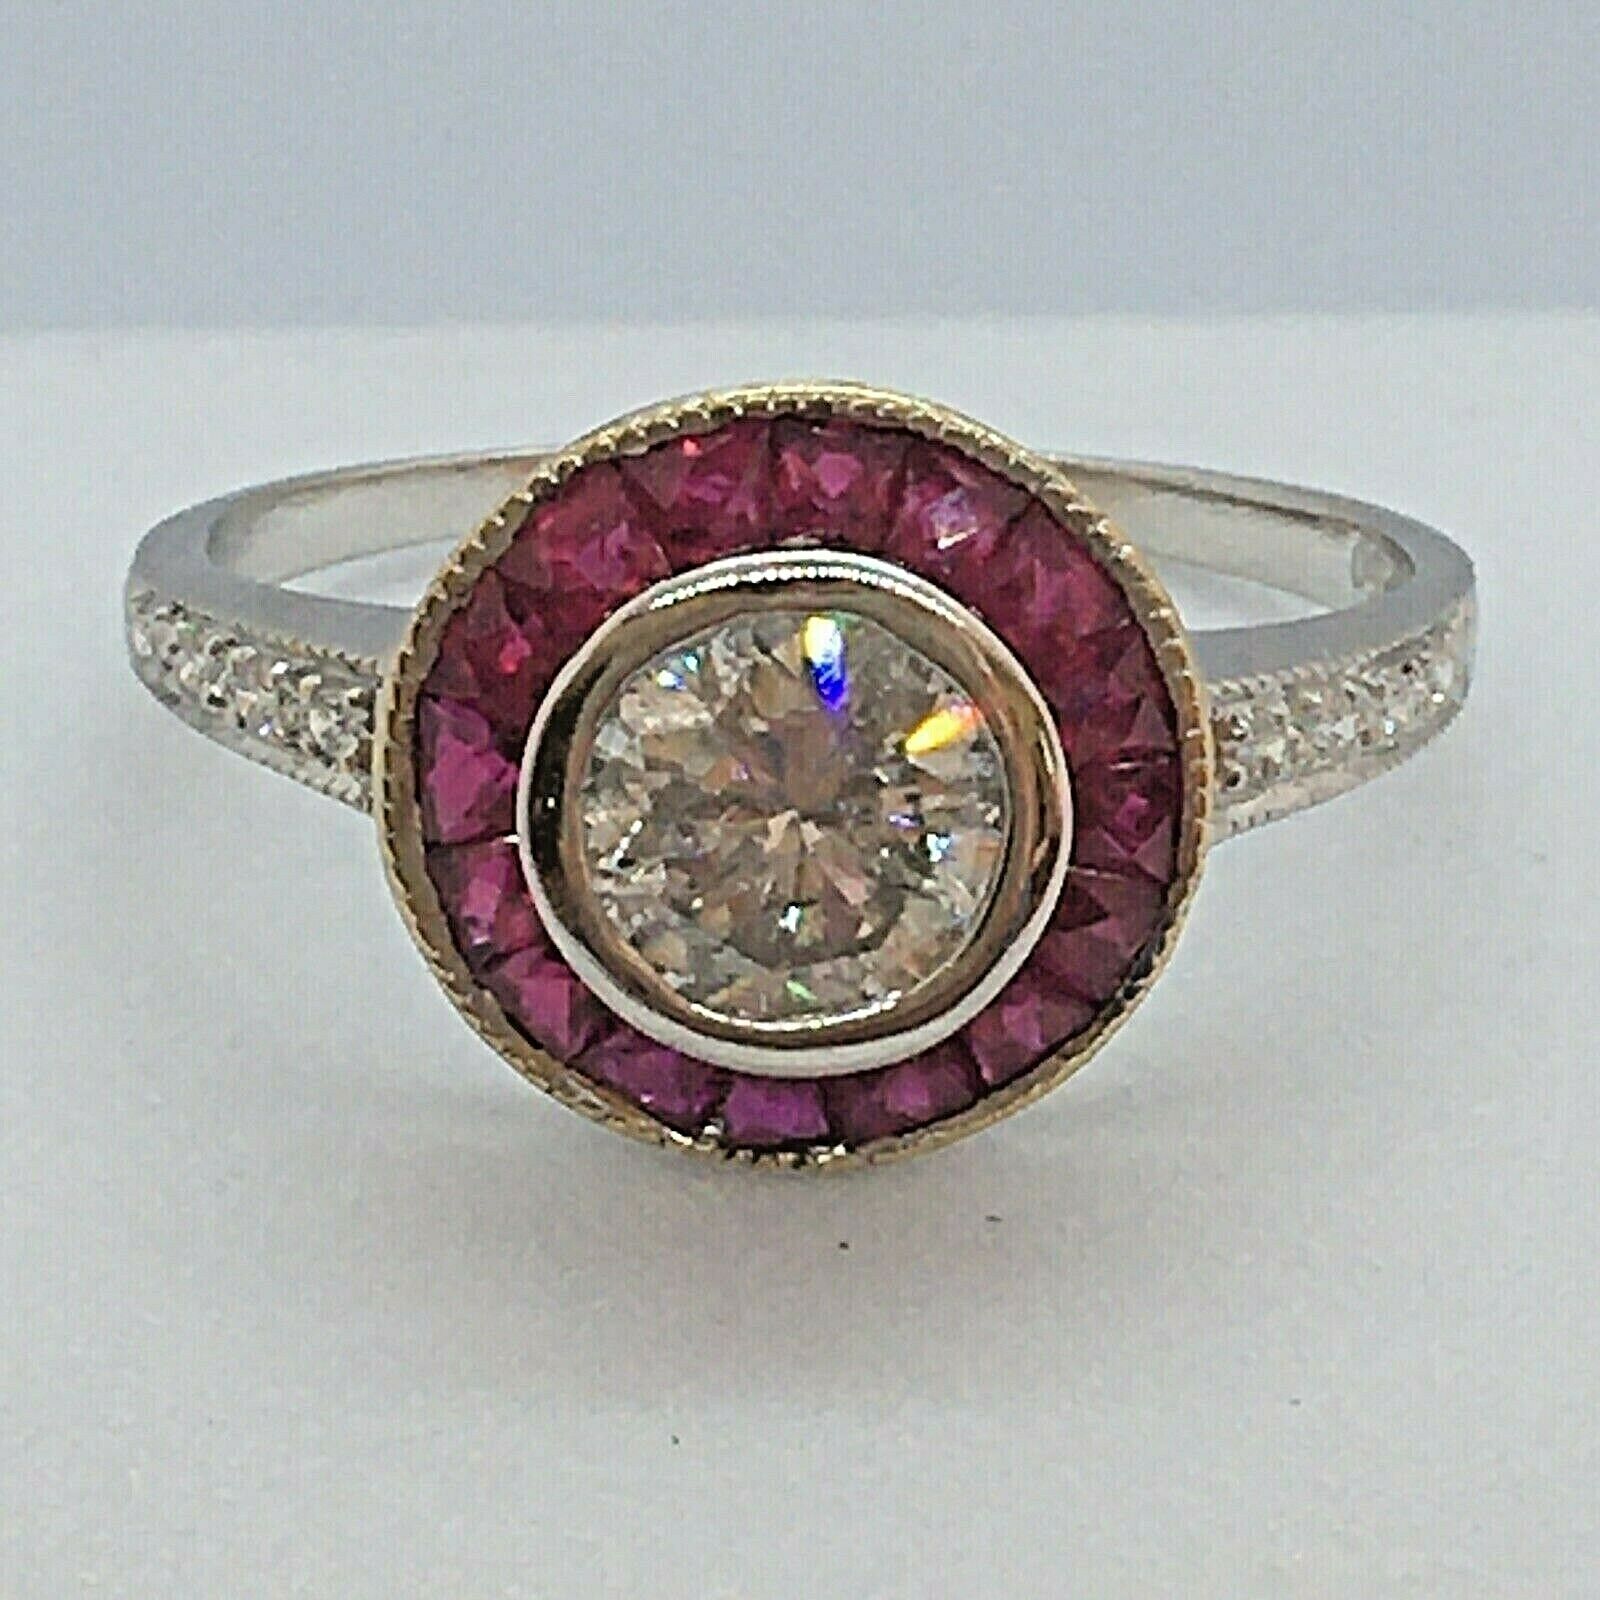 Art Deco style diamond and ruby ring. Nobel Antique jewelry Store, Santa Monica. Made in America.